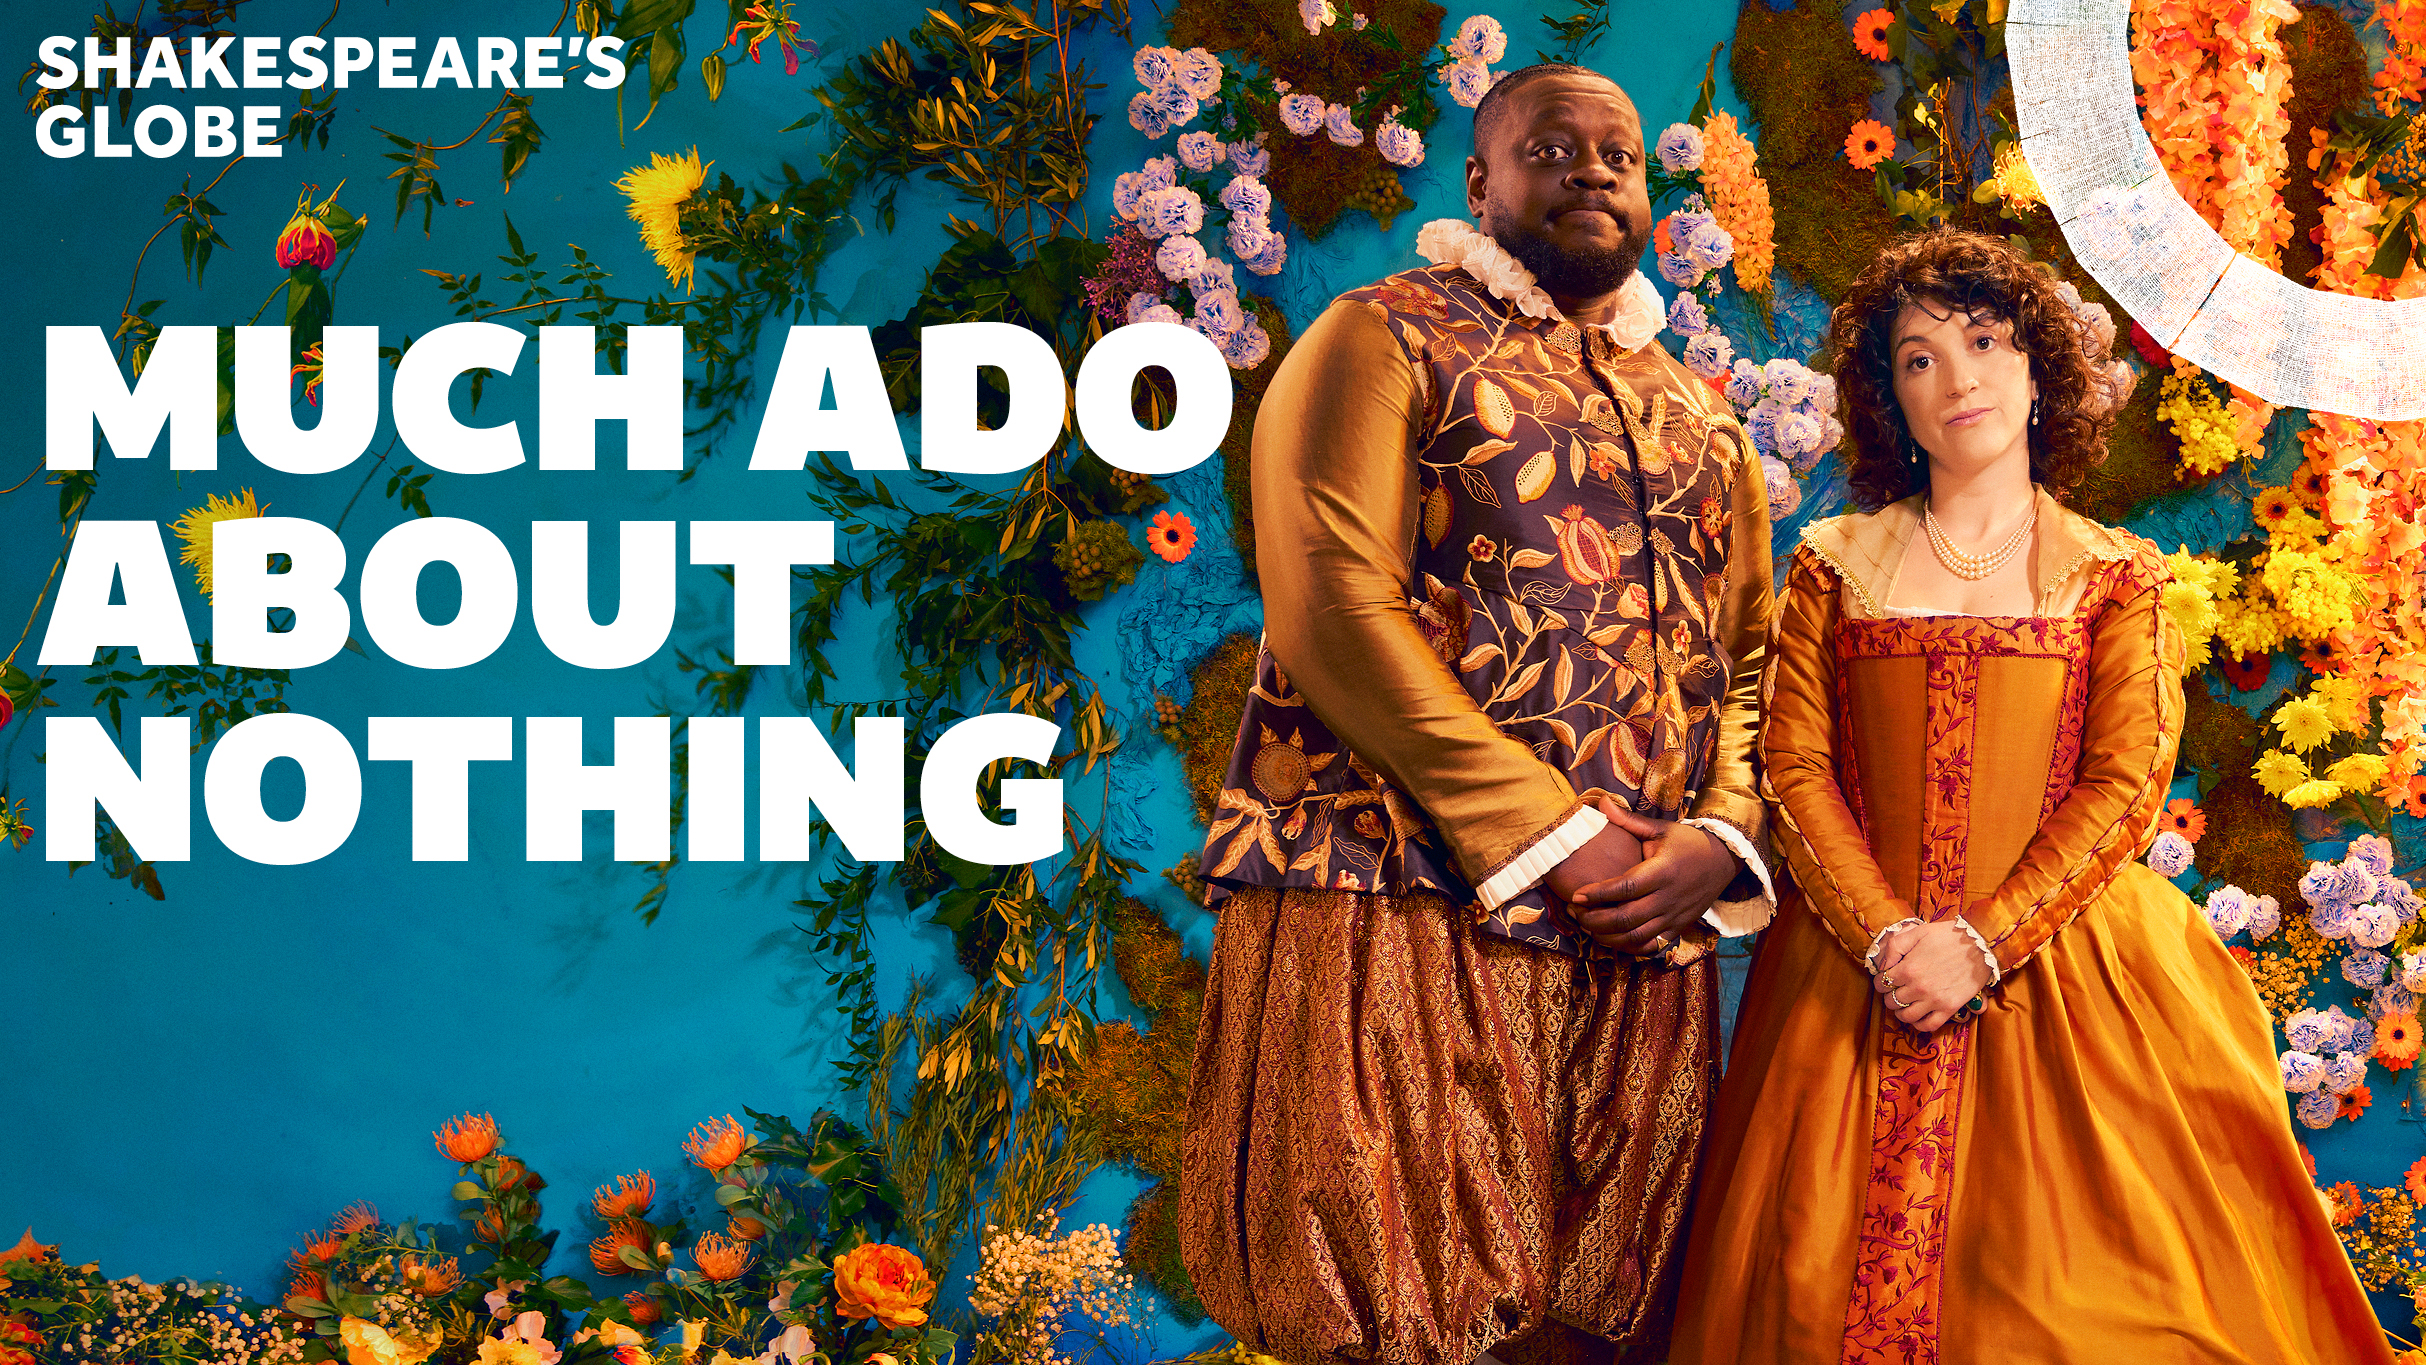 Much Ado About Nothing - Shakespeare's Globe